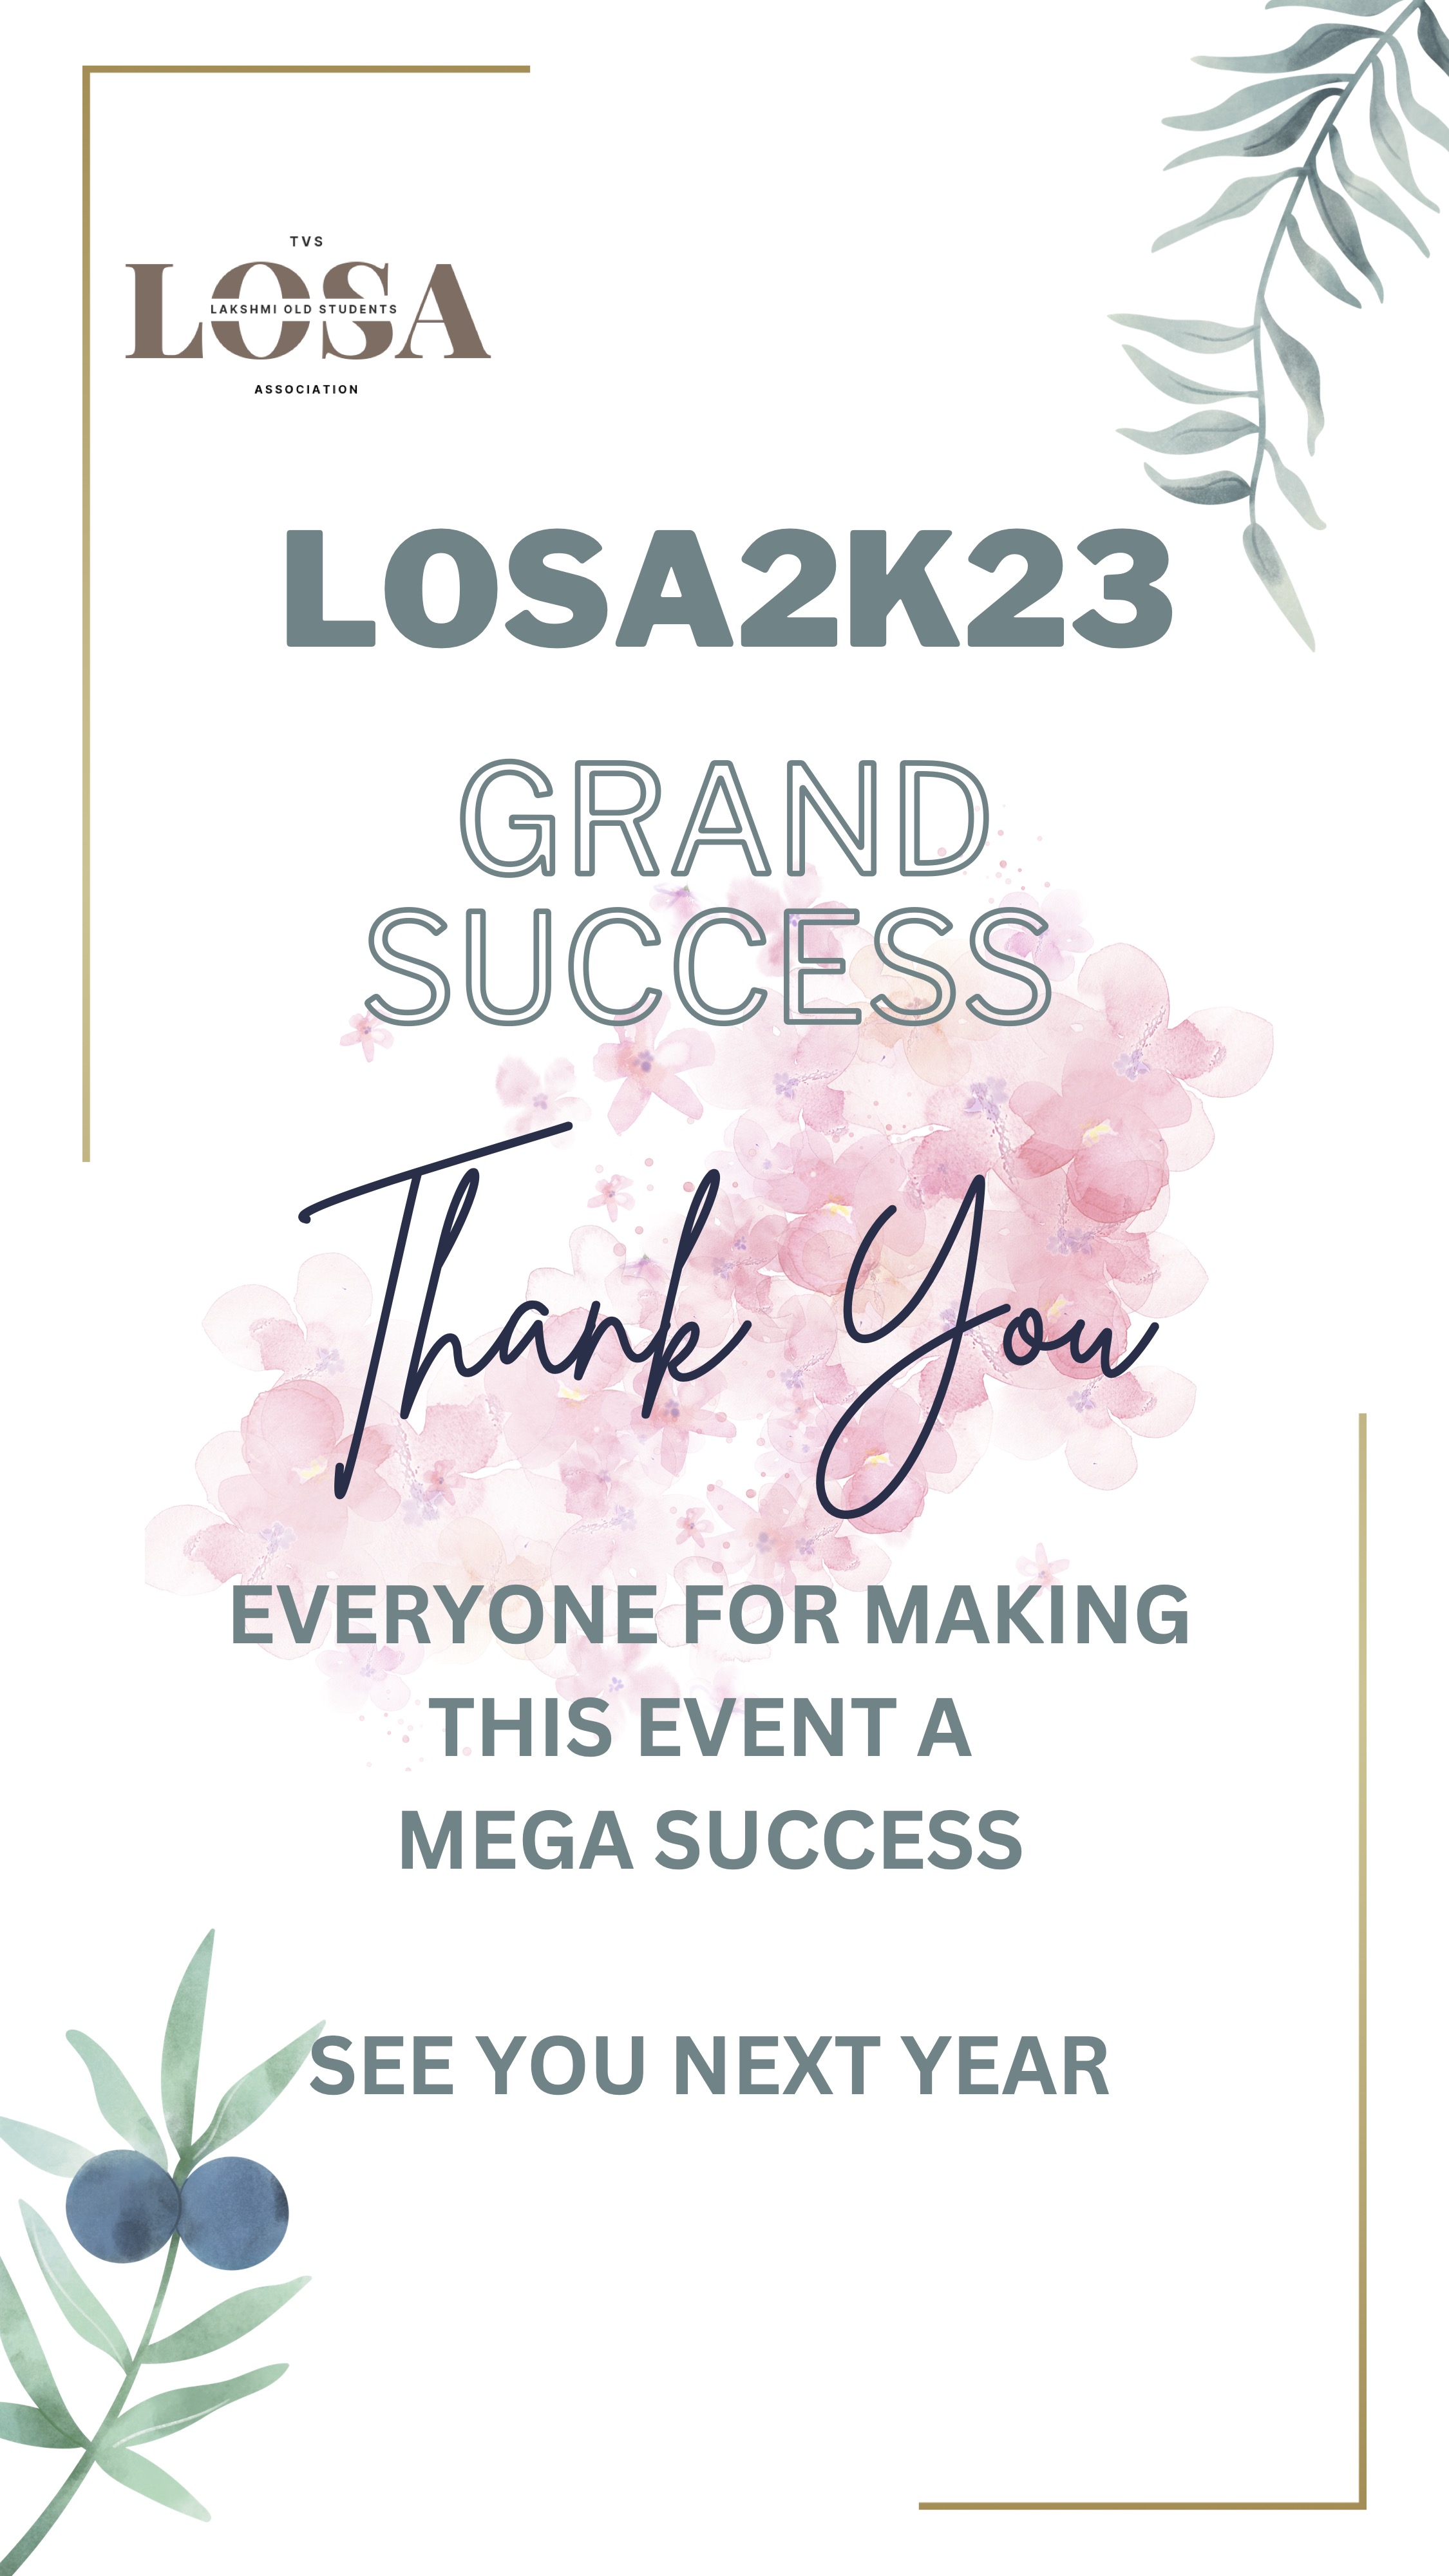 LOSA 2K23 Grand Success. Thank You Everyone For Making This Event A Mega Success! See You Next Year!